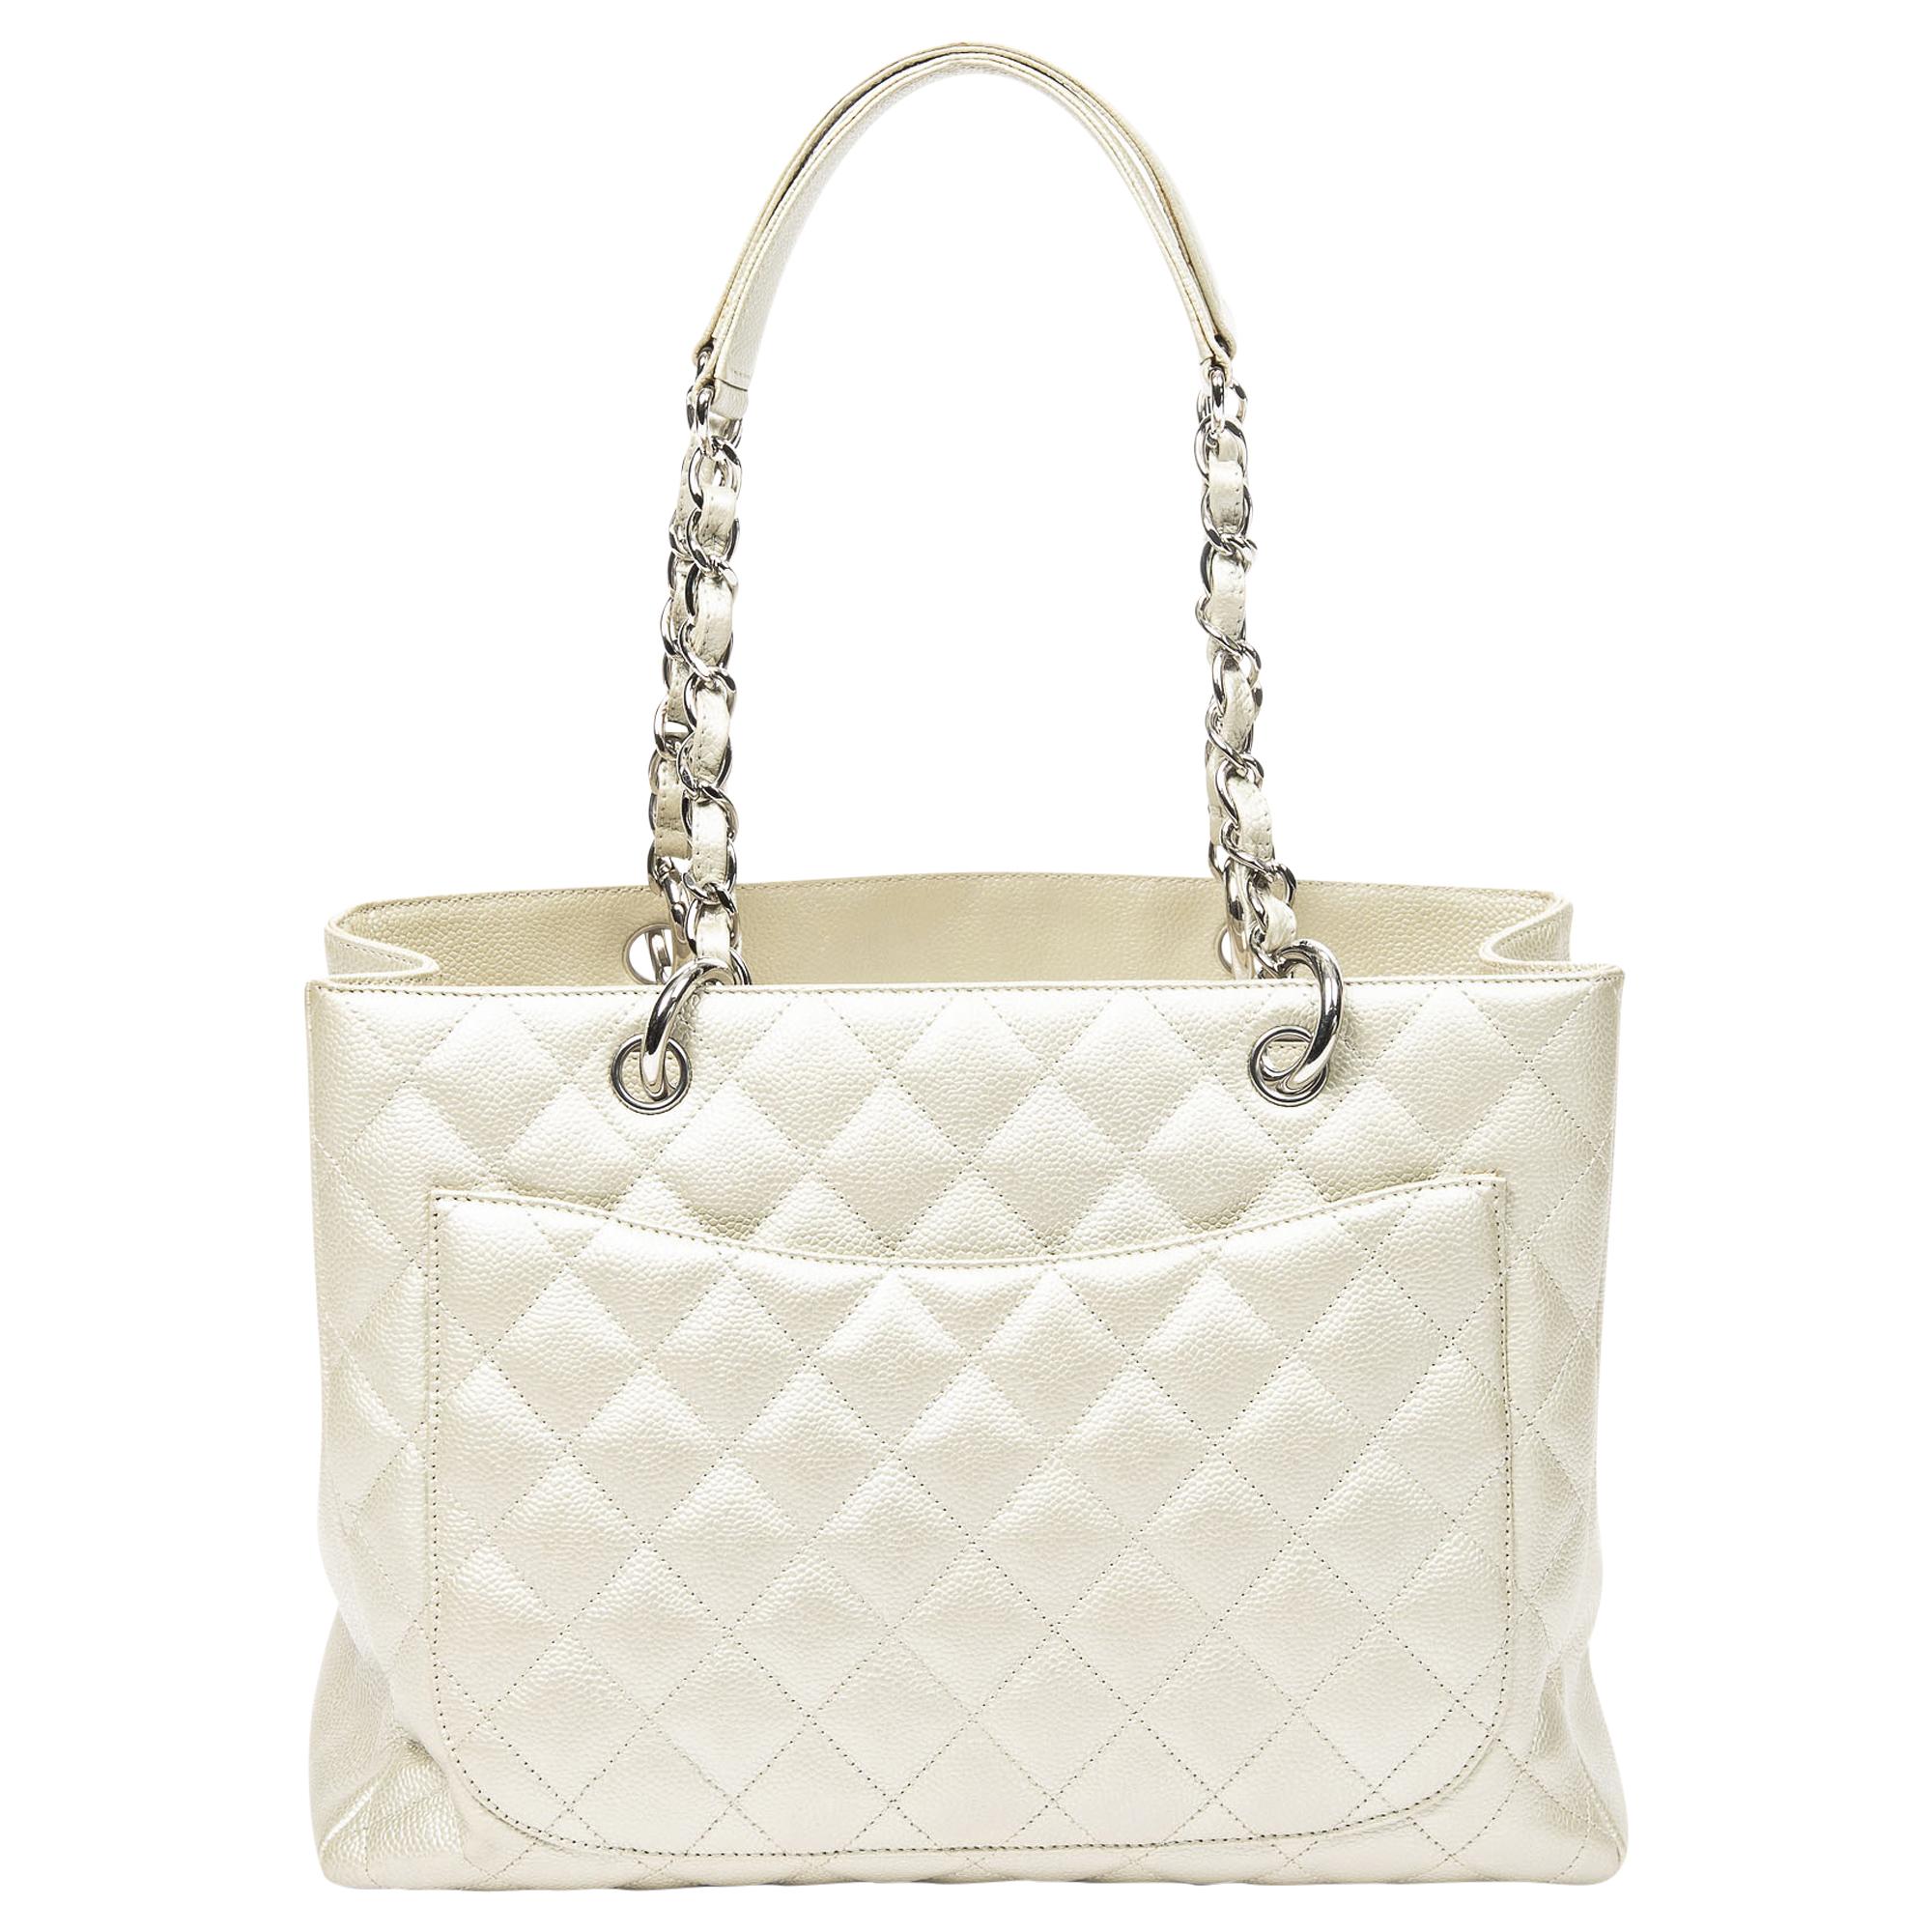 Chanel 2008 Champagne Quilted Tote In Good Condition For Sale In Atlanta, GA